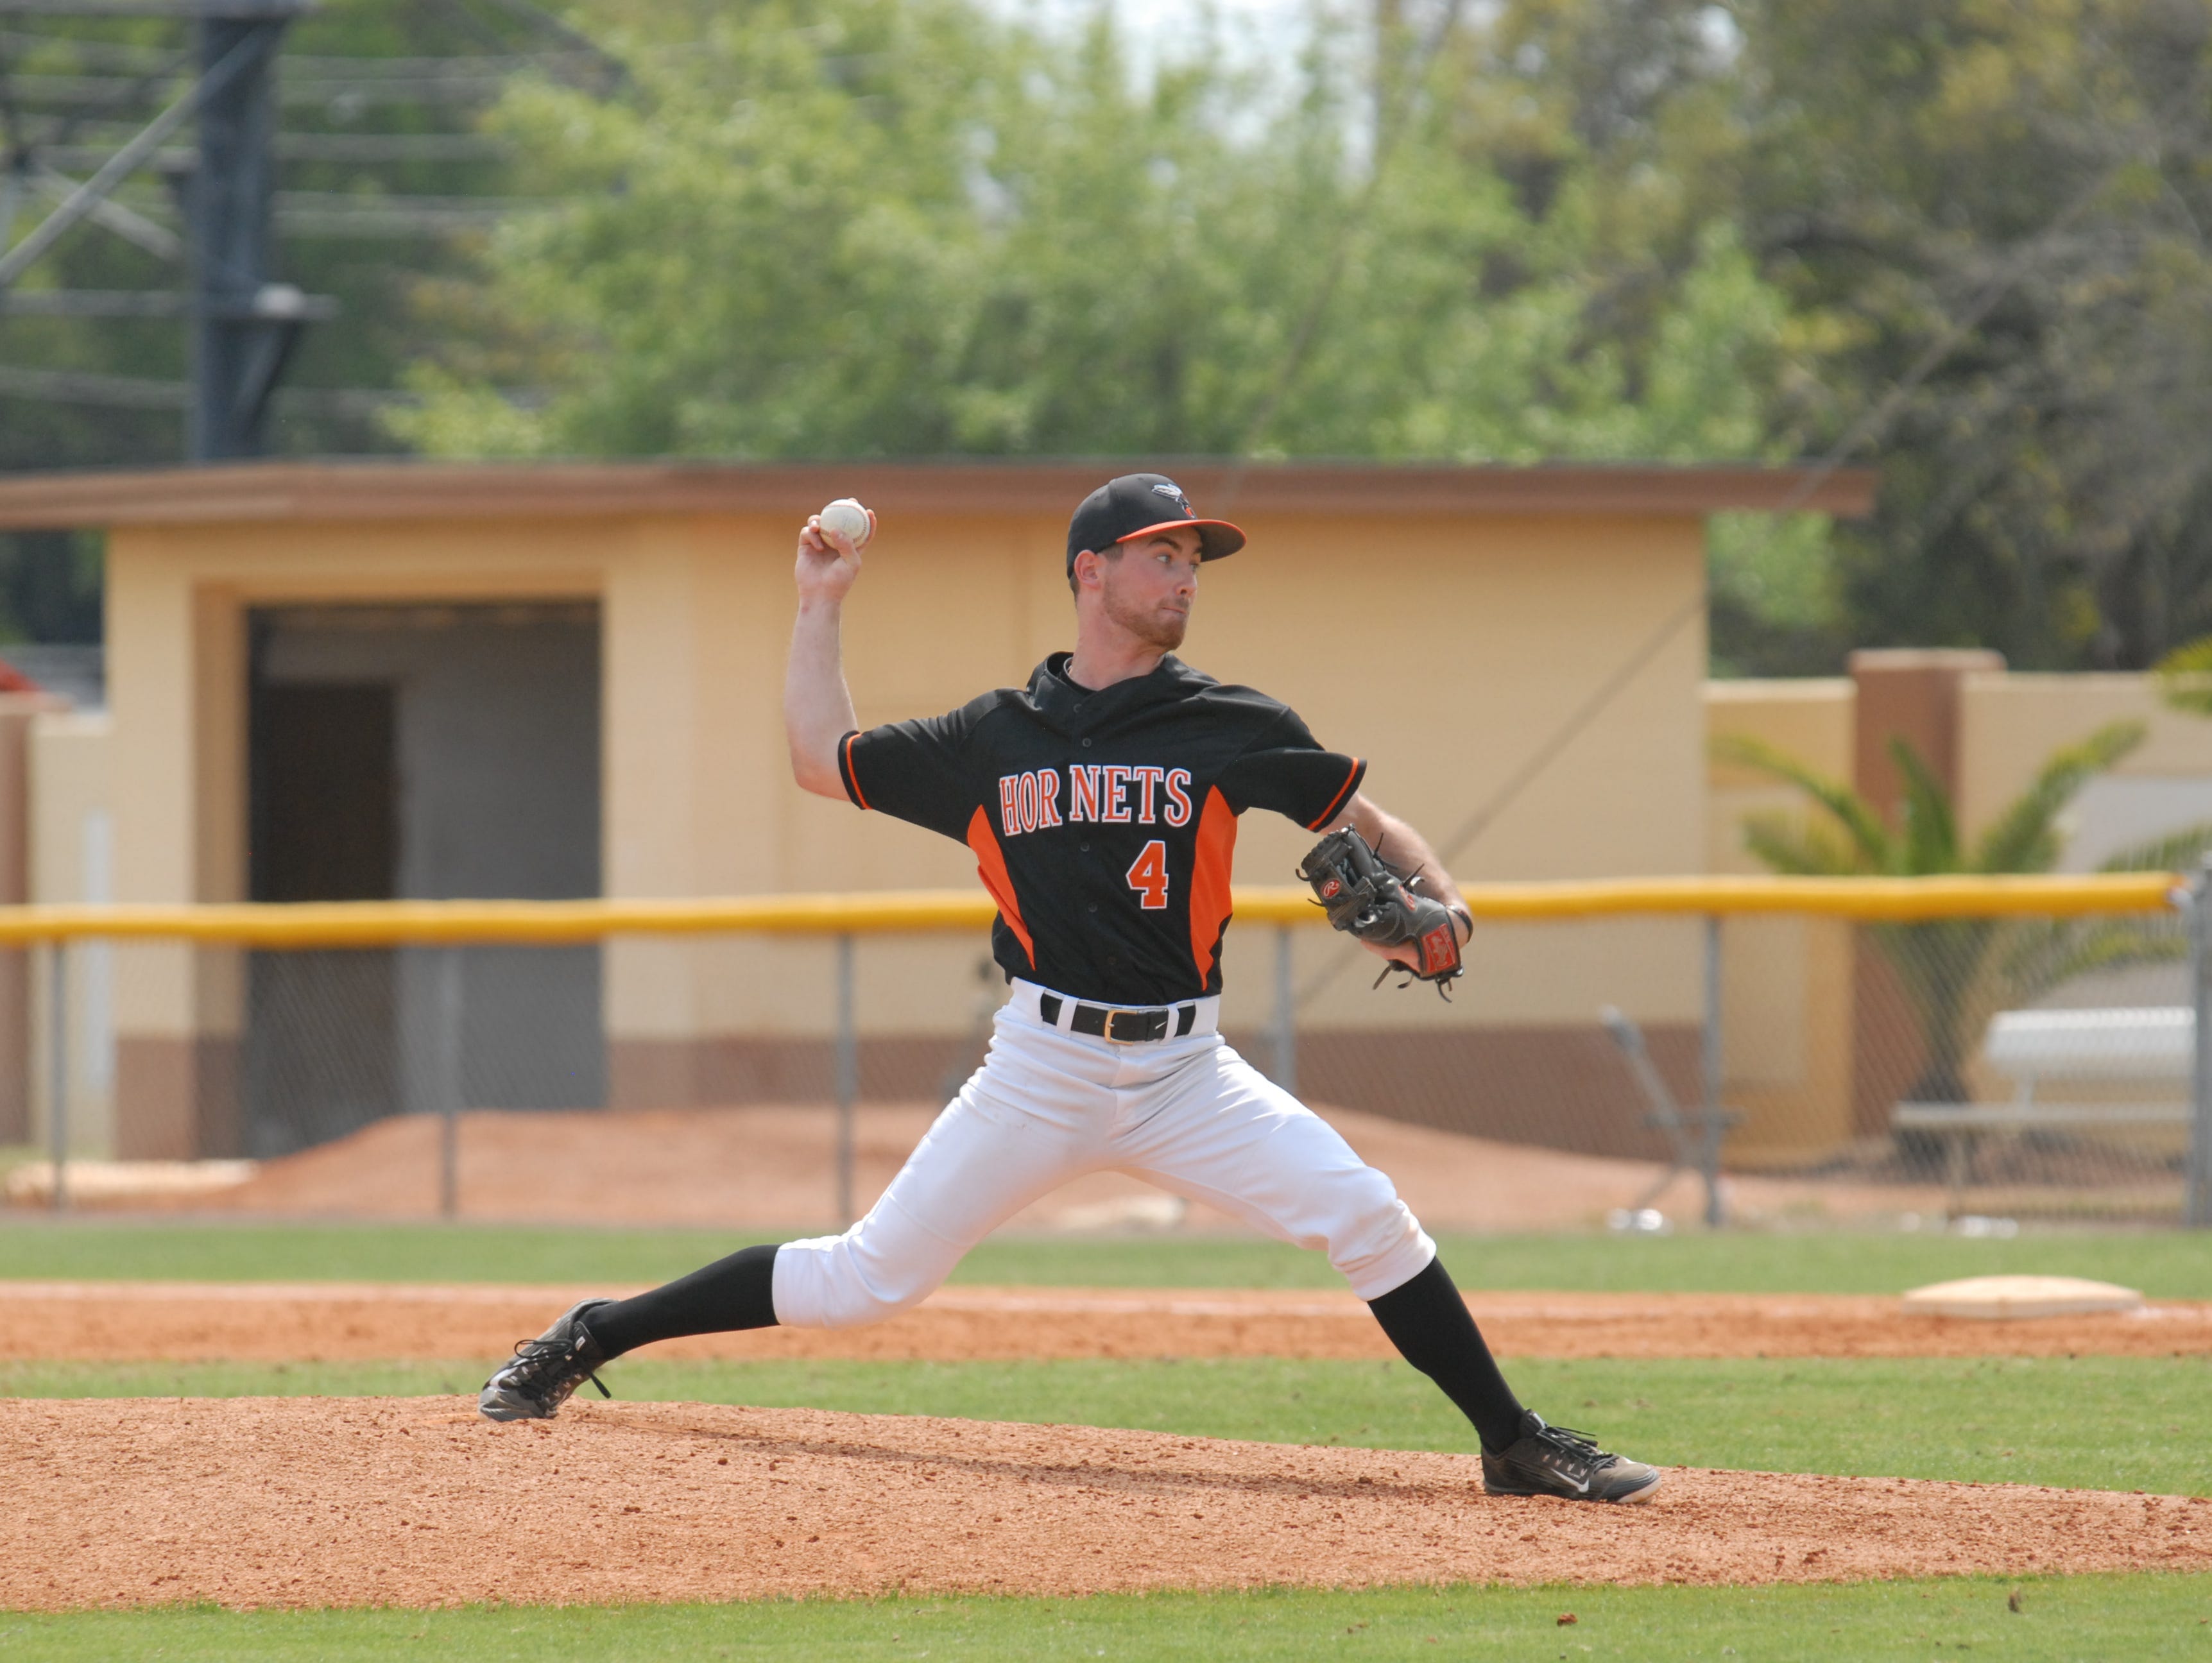 Bath graduate Ryan Orr picked up the pitching victory in the decisive game of the MIAA tournament to help Kalamazoo College reach the NCAA tournament.